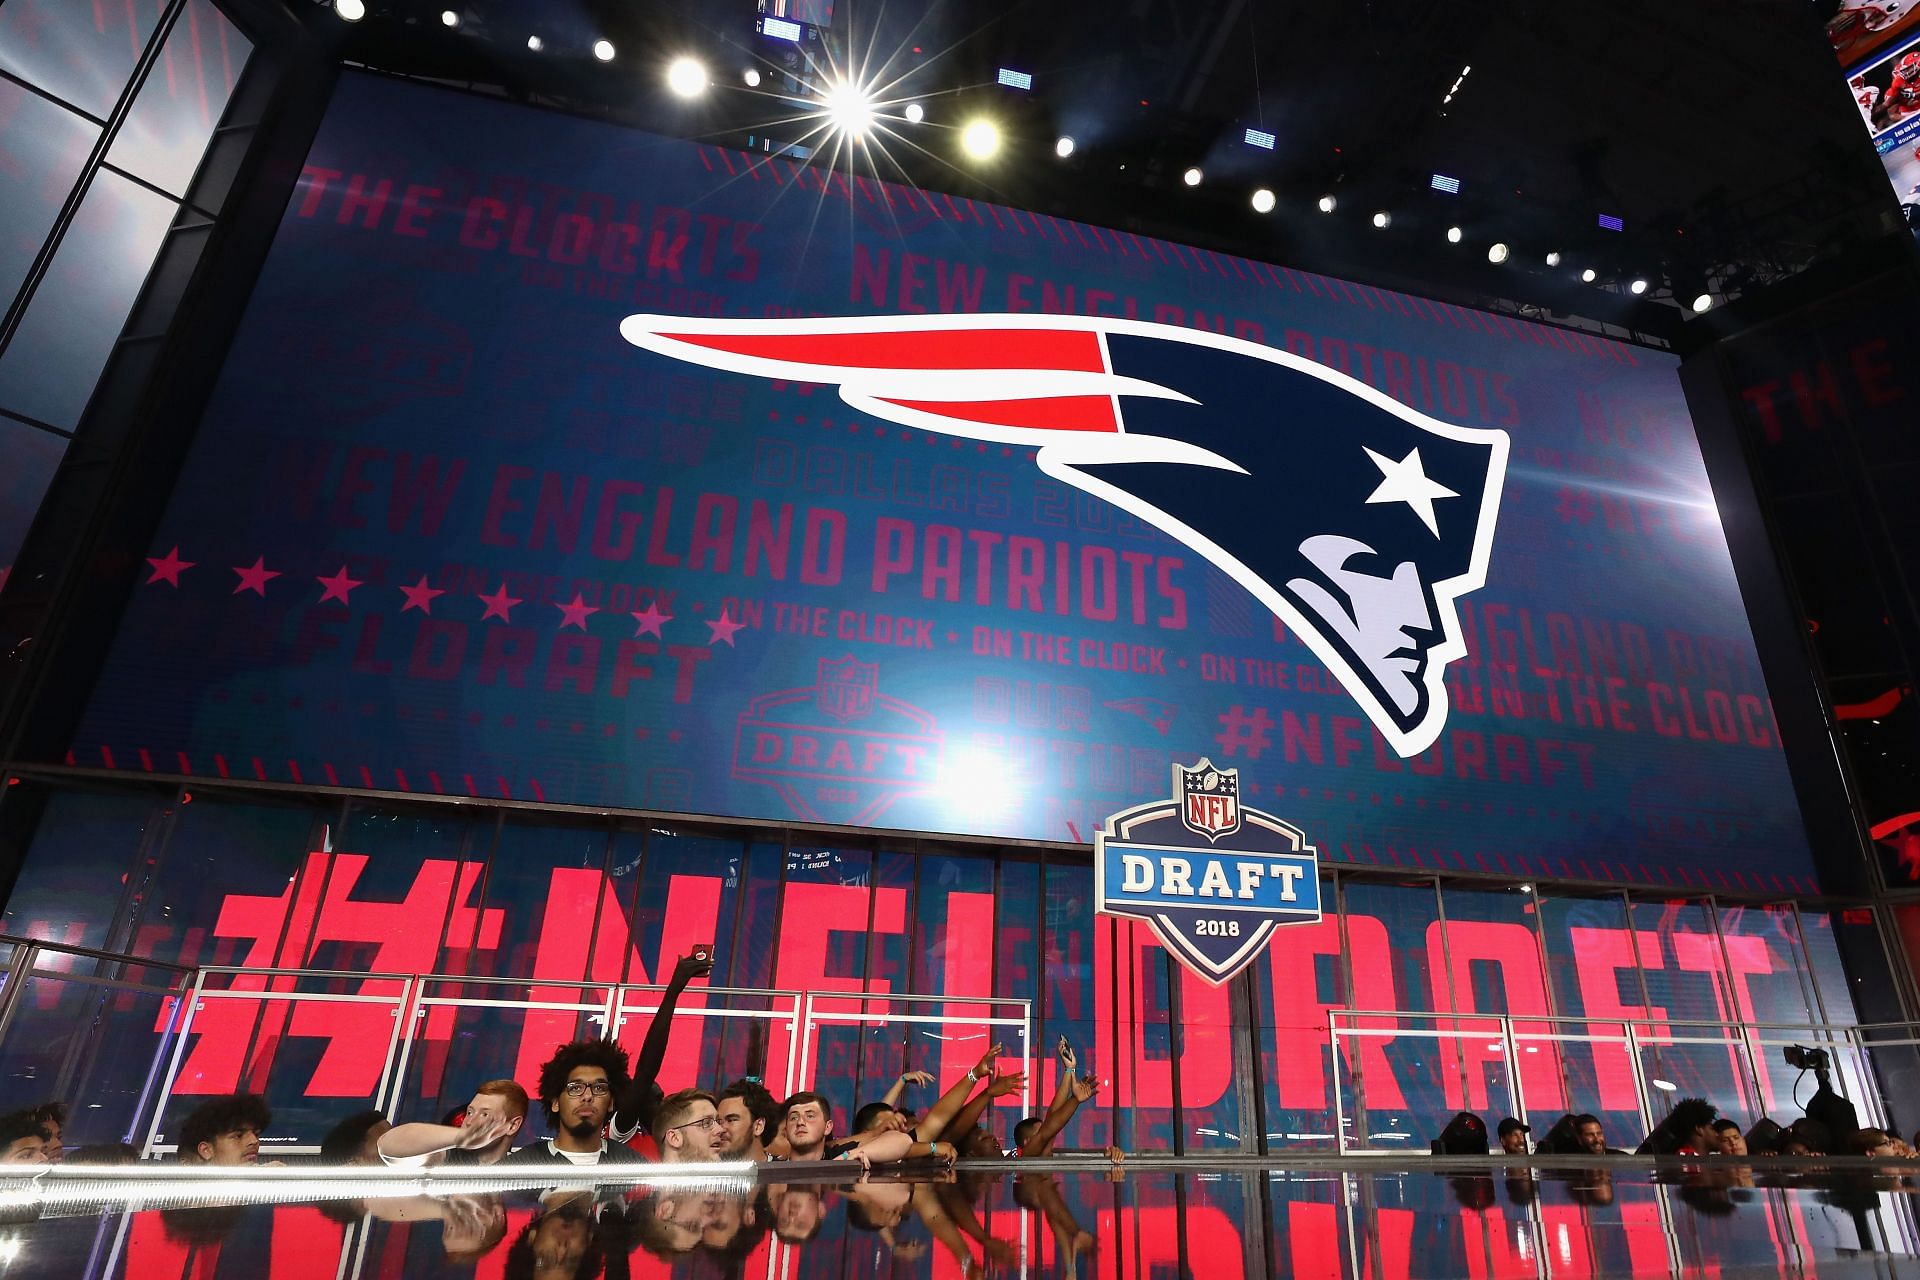 Patriots signage at the 2018 NFL Draft (Photo: Getty)